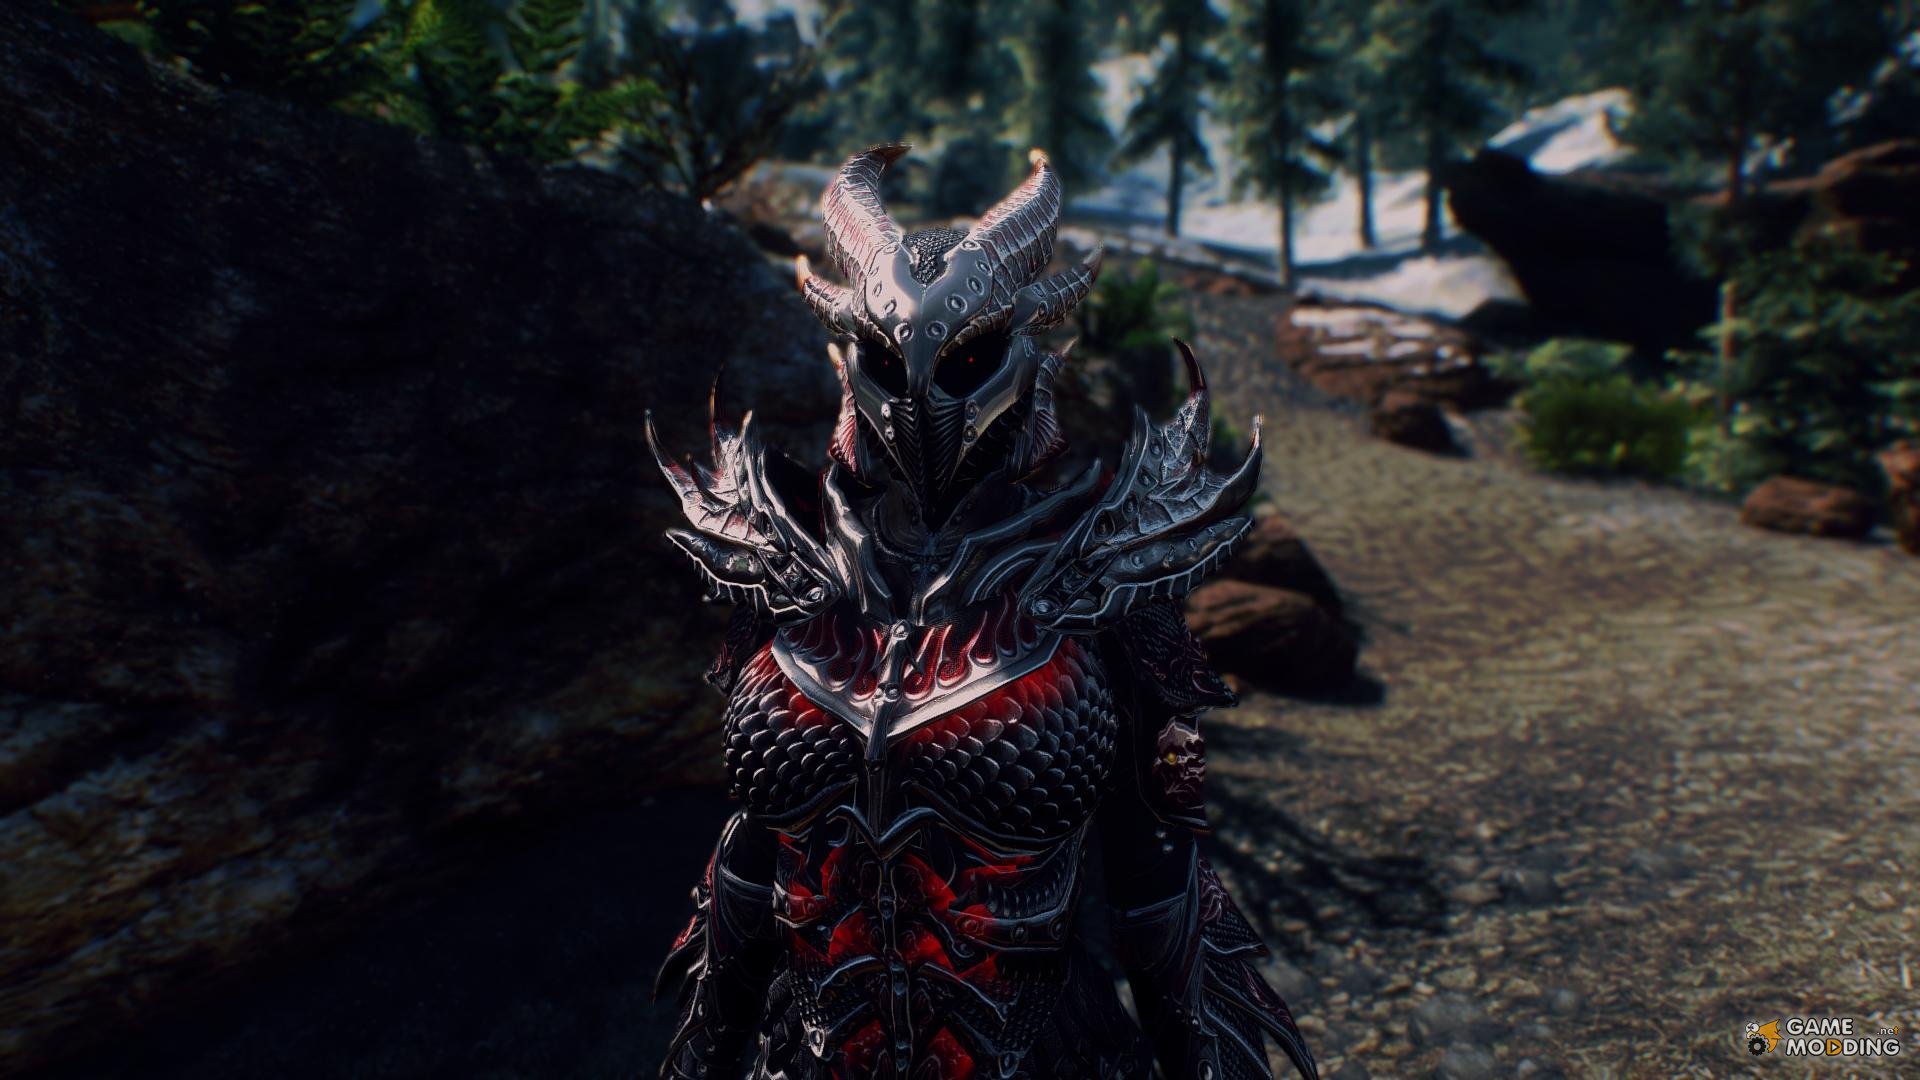 daedric armor and weapon improvement for tes v skyrim.